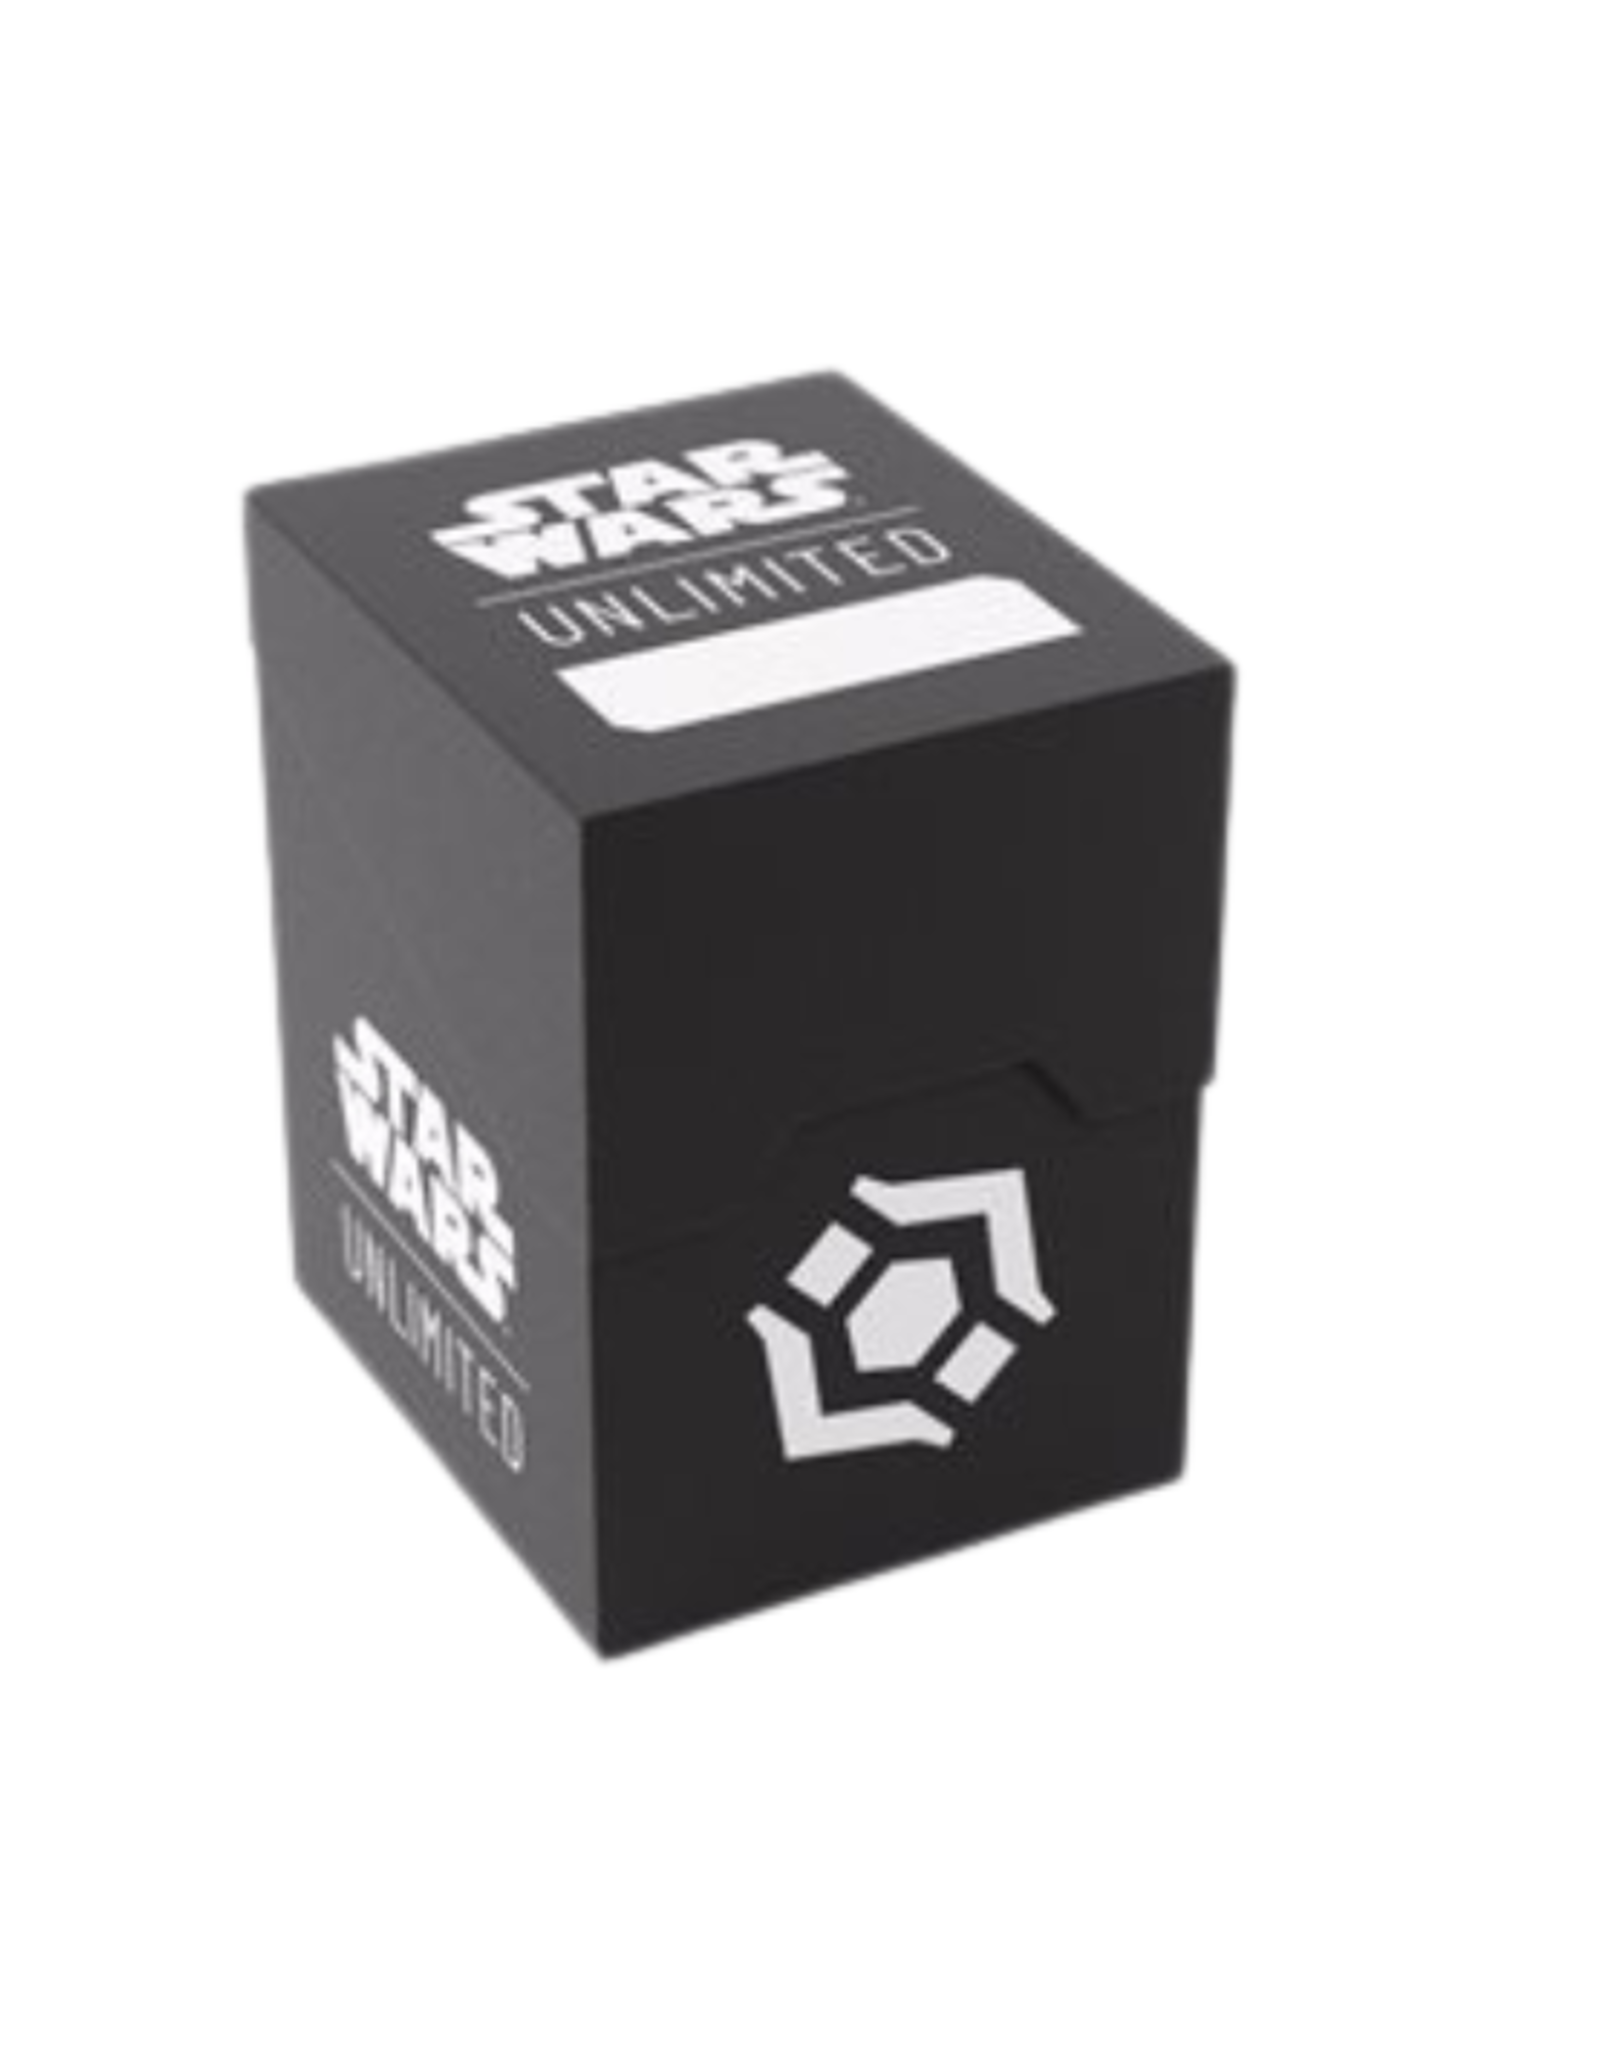 Gamegenic Gamegenic - Star Wars: Unlimited Soft Crate: Black/White